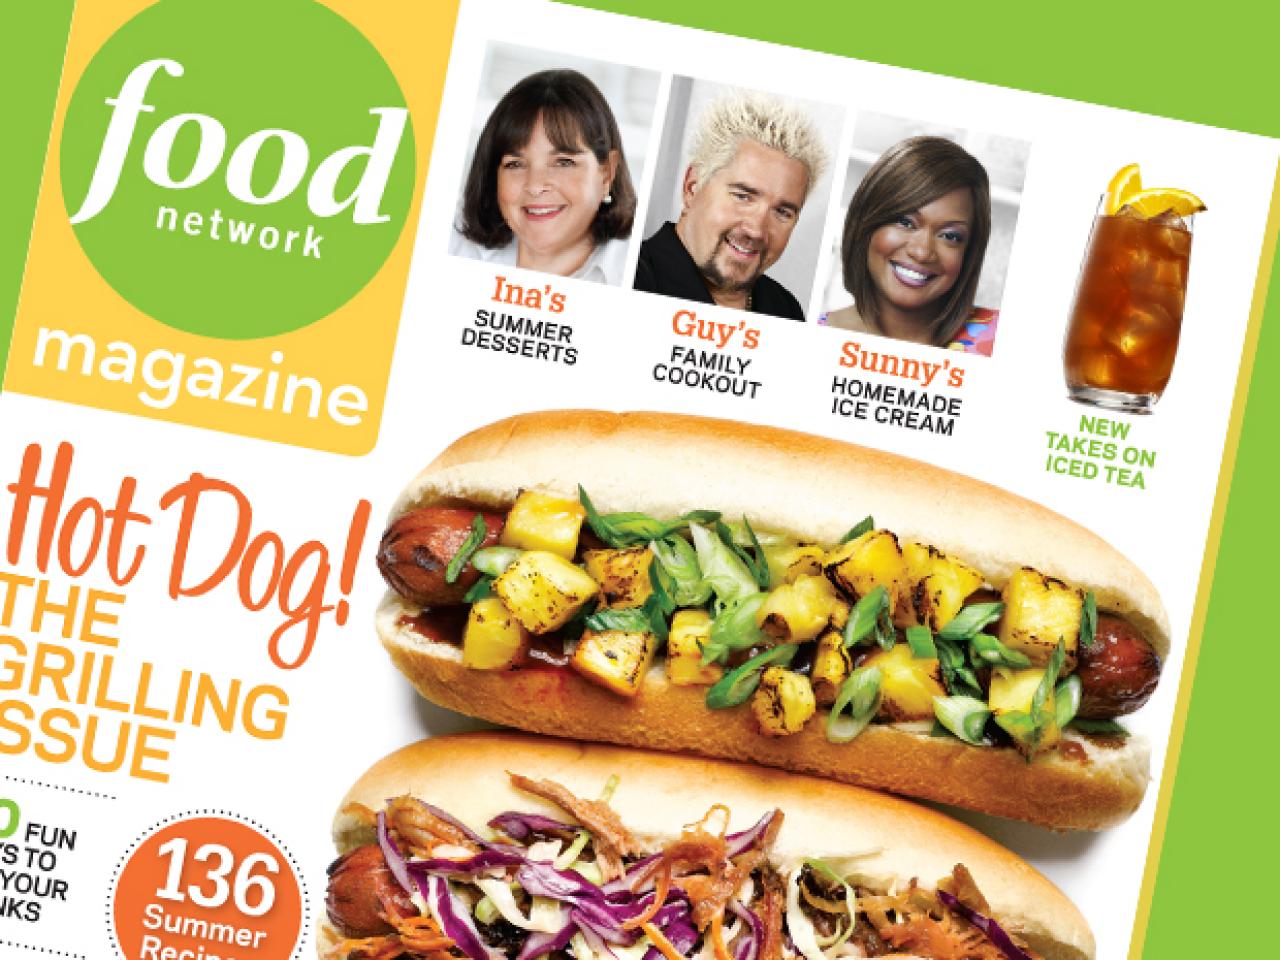 Food Network Magazine, December 2011 Eat Your Books